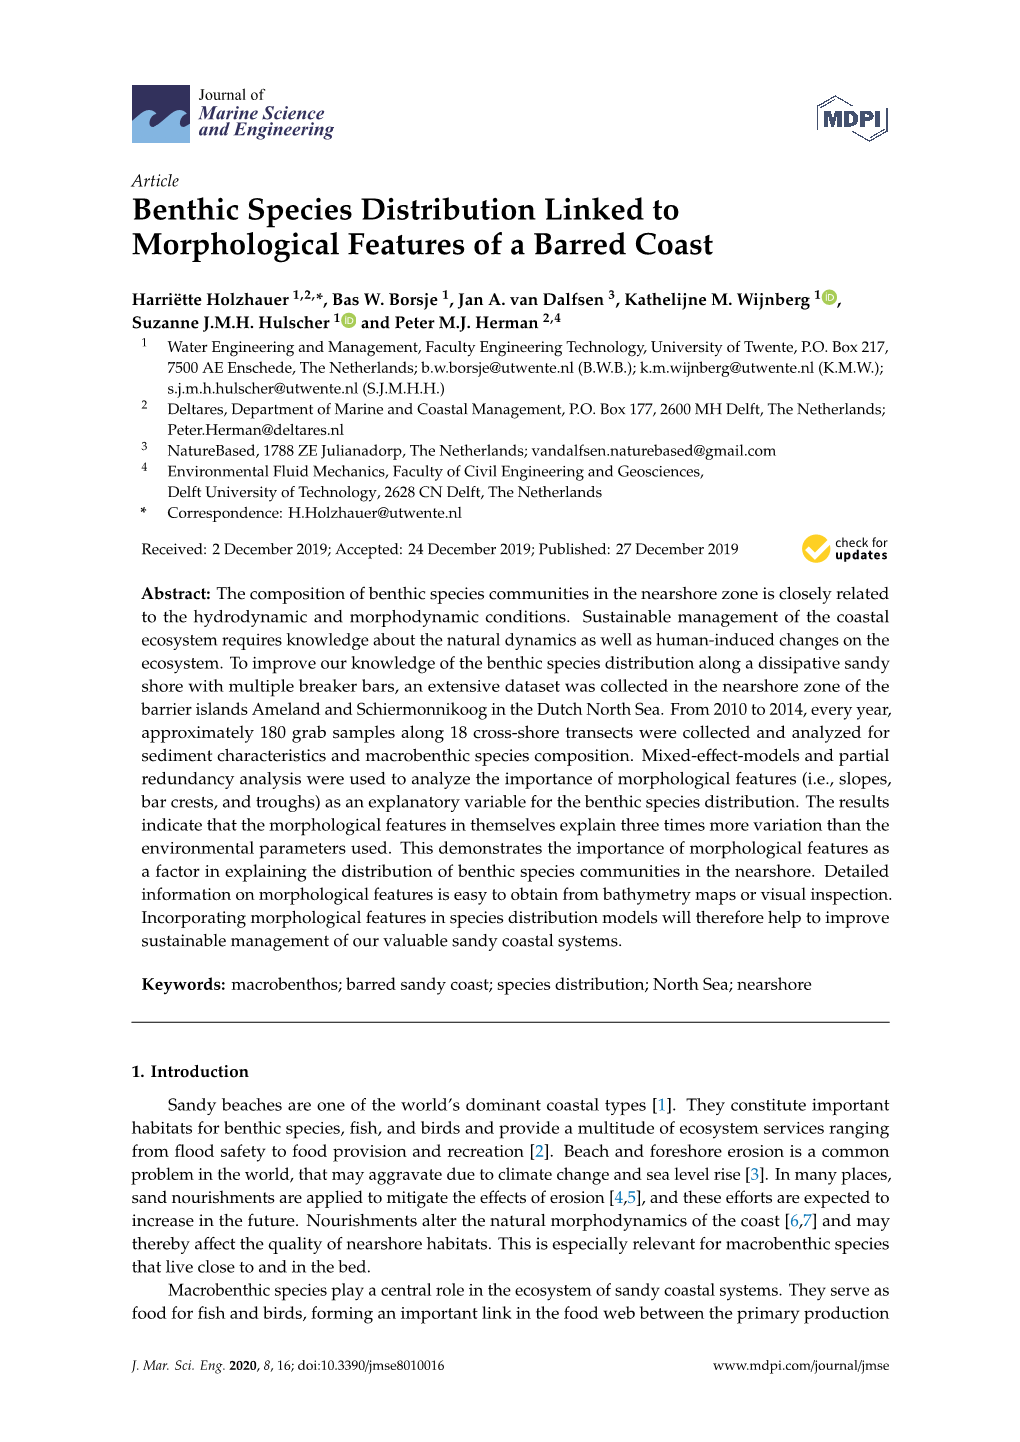 Benthic Species Distribution Linked to Morphological Features of a Barred Coast